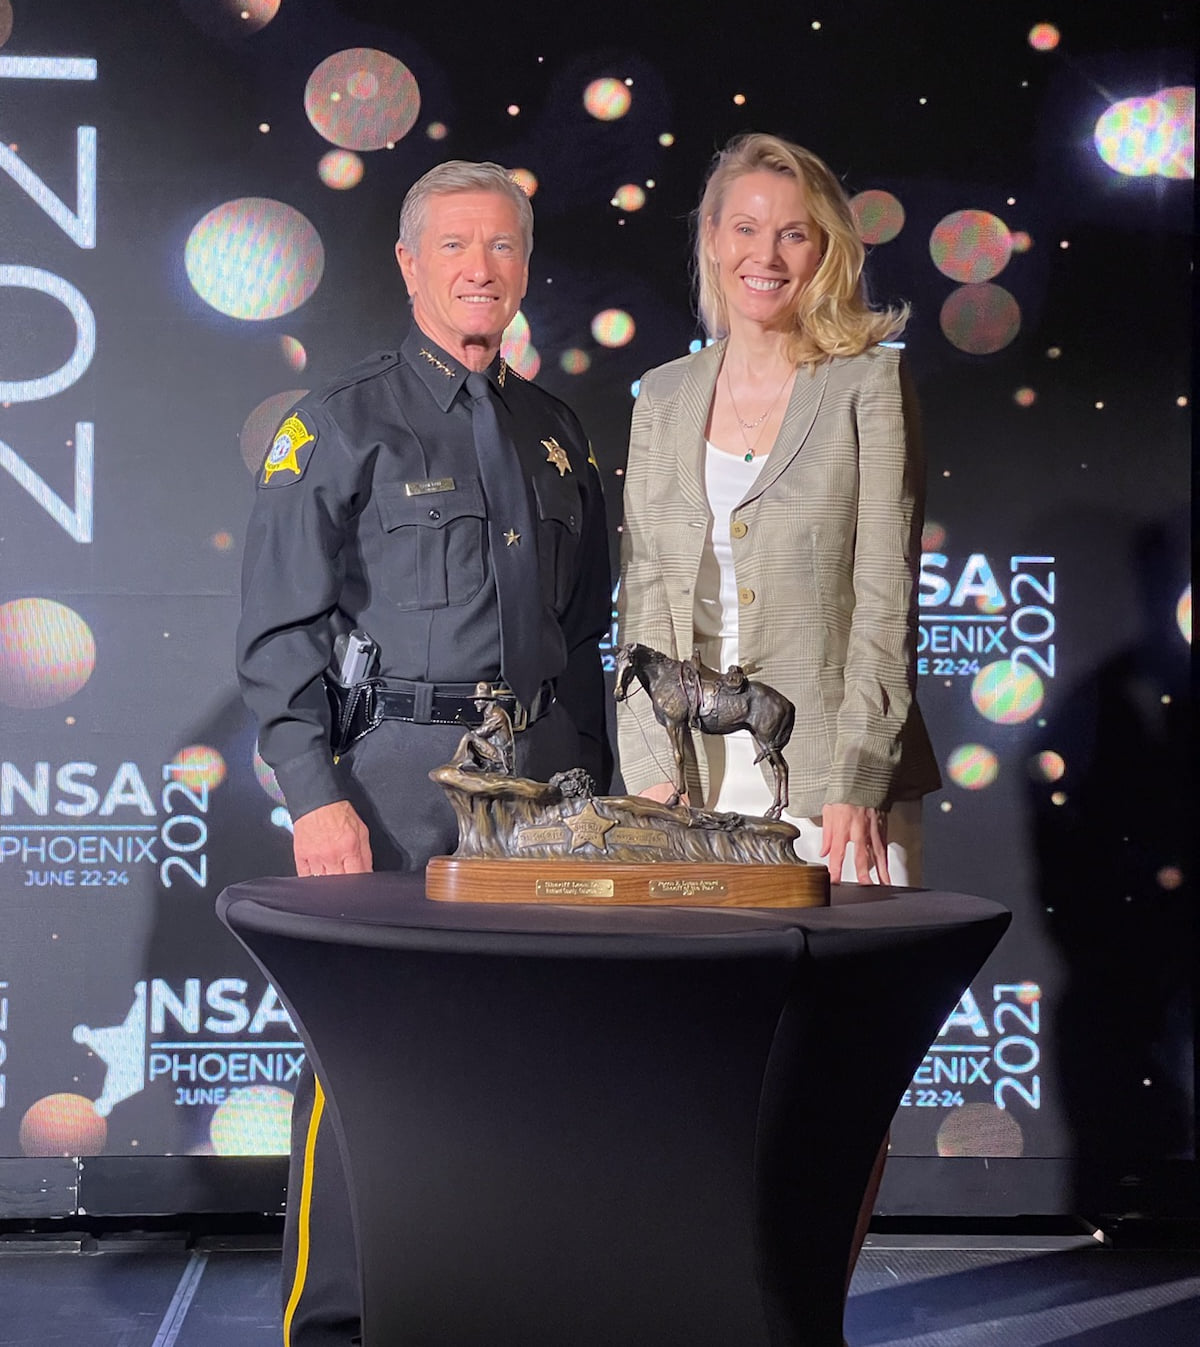 Sheriff Lott with Lisa Broderick, executive director of Police2Peace, following the 2021 National Sheriffs’ Association awards presentation on June 23 in Phoenix, Arizona, in which Lott was named National Sheriff of the Year. Photo courtesy of RCSD